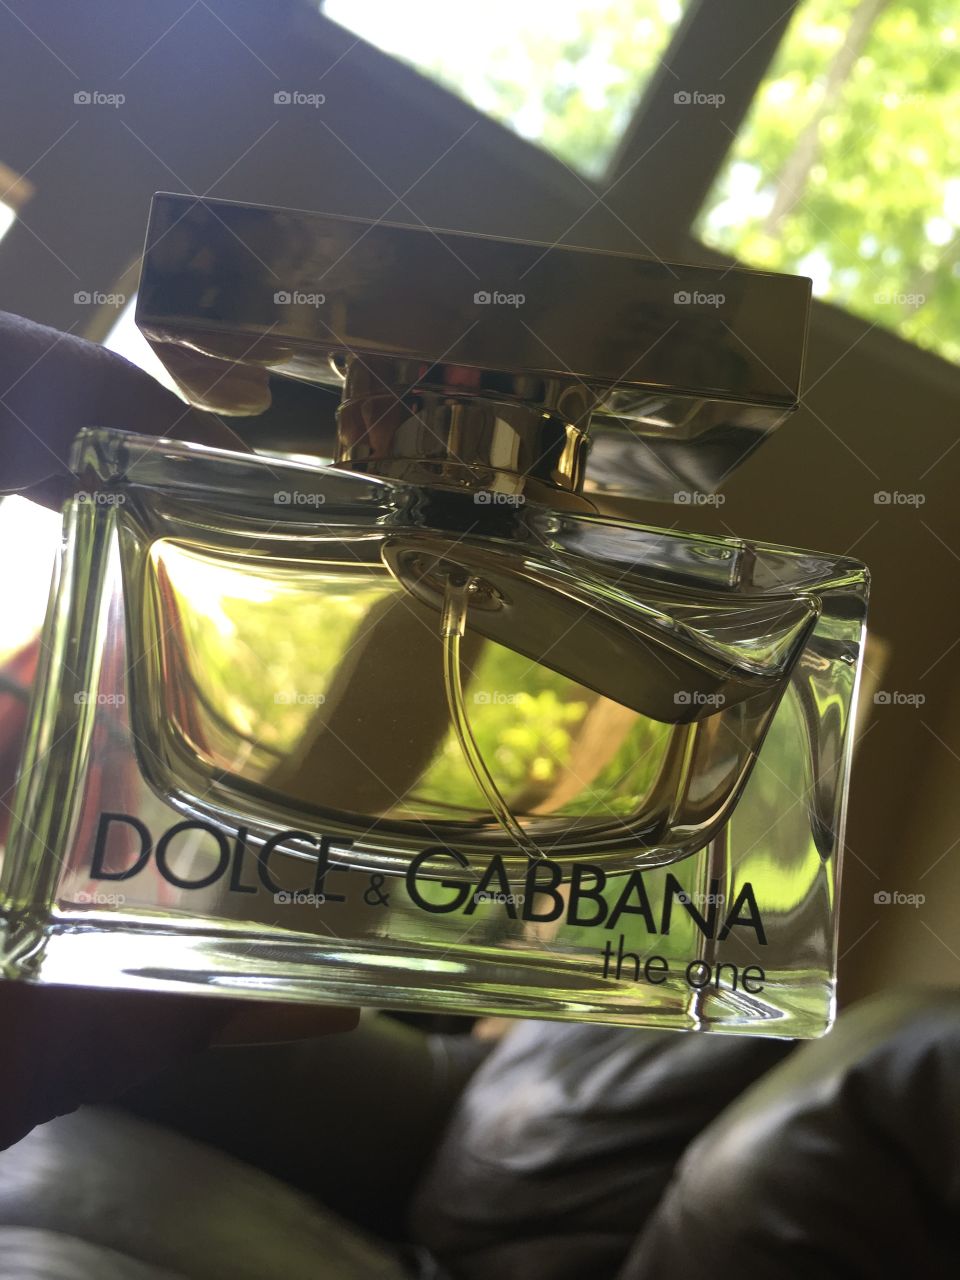 Dolce and Gabbana "The One" Perfume 